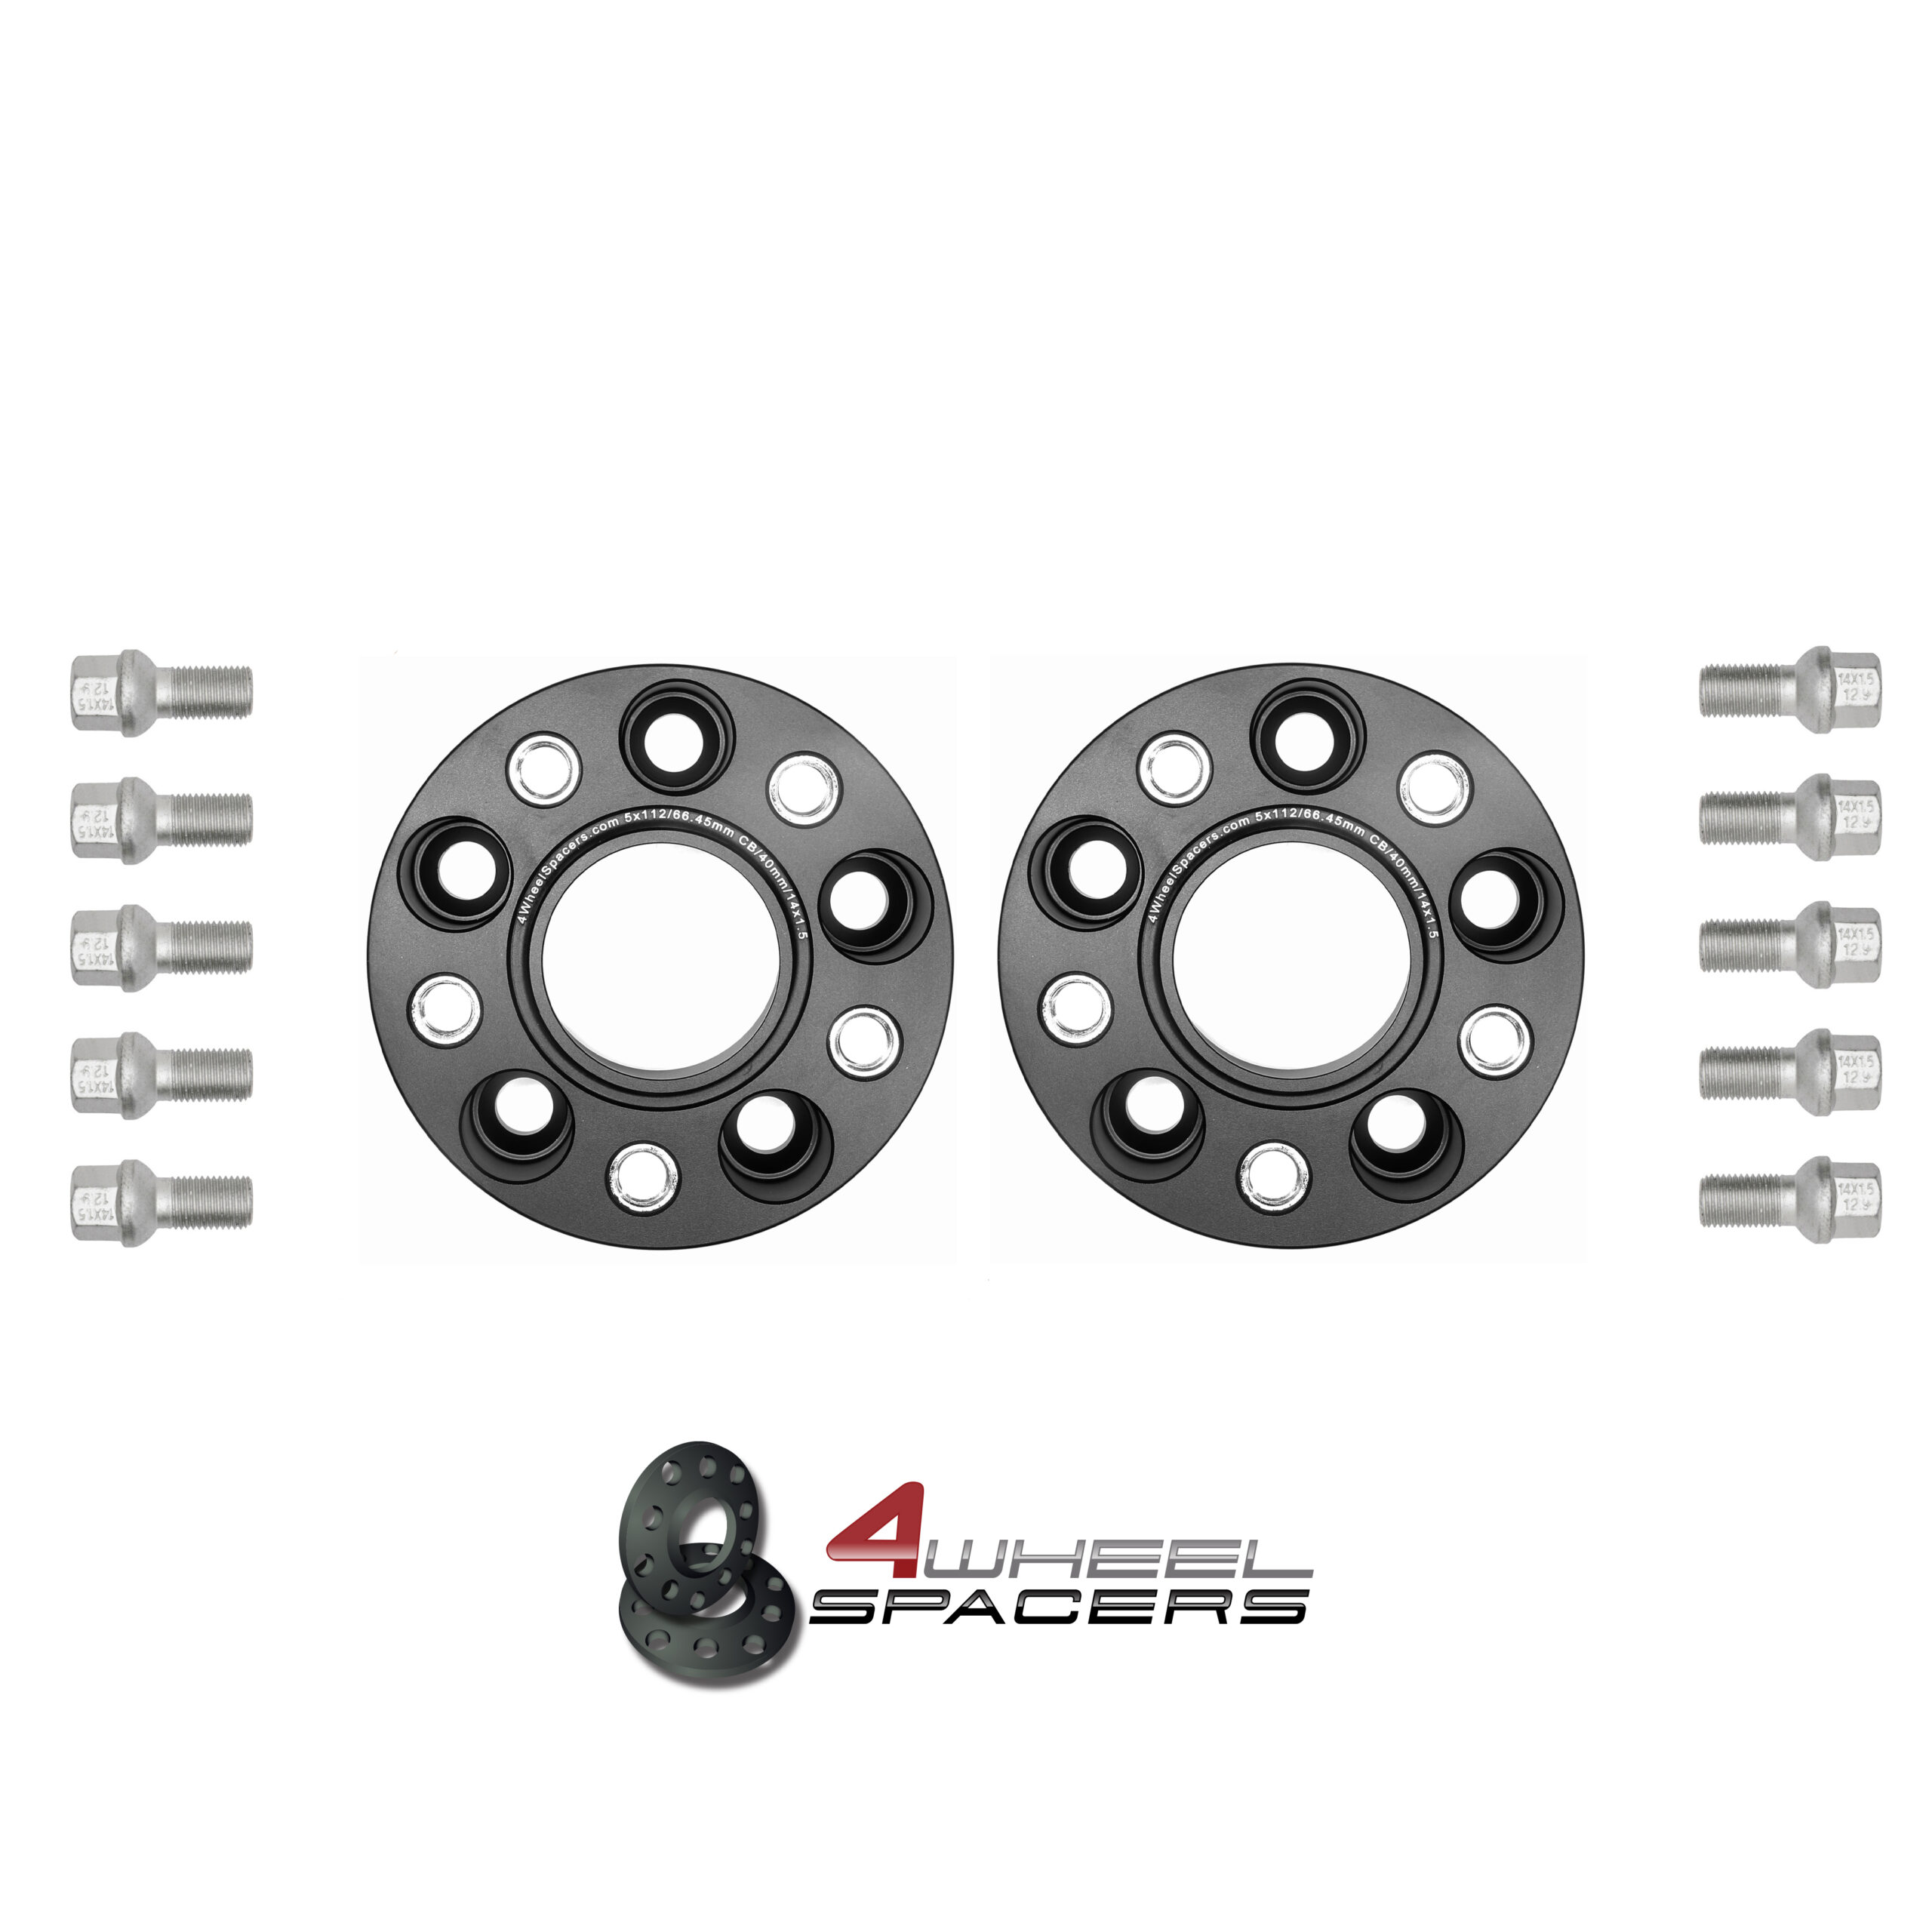 4 25mm 1" Forged Wheel Spacers for Mercedes G Class  W461 W463 W460 G55 G500